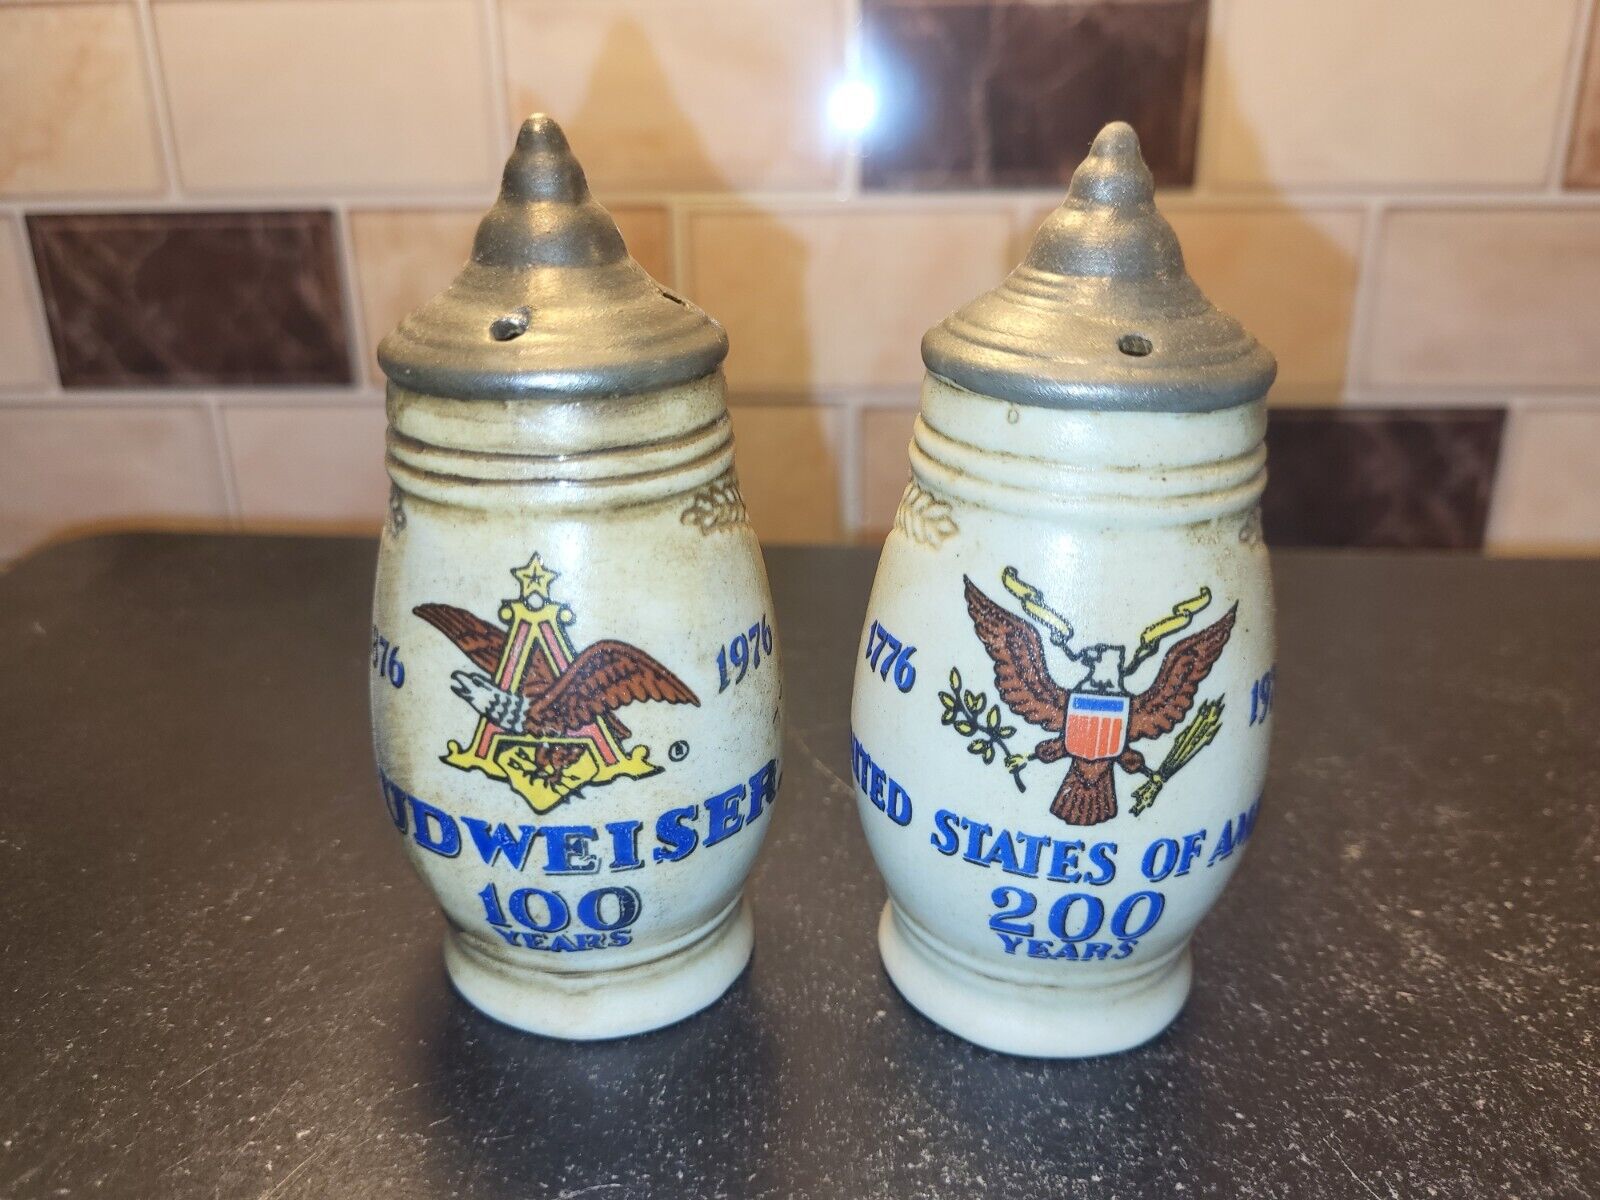 1976 Budweiser 100 Year Anniversary Salt and Pepper Shakers by Ceramarte 3.75